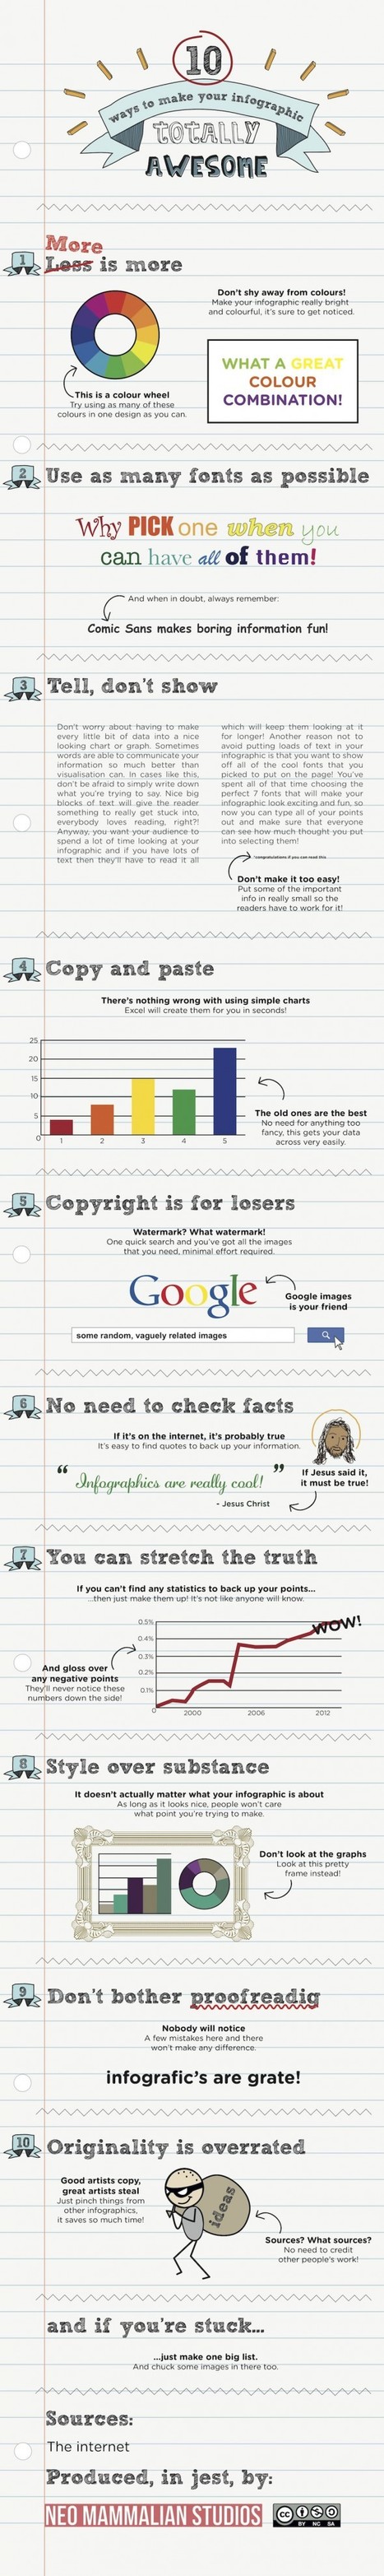 Make Awesome Infographics In 10 Easy Steps | Digital-News on Scoop.it today | Scoop.it